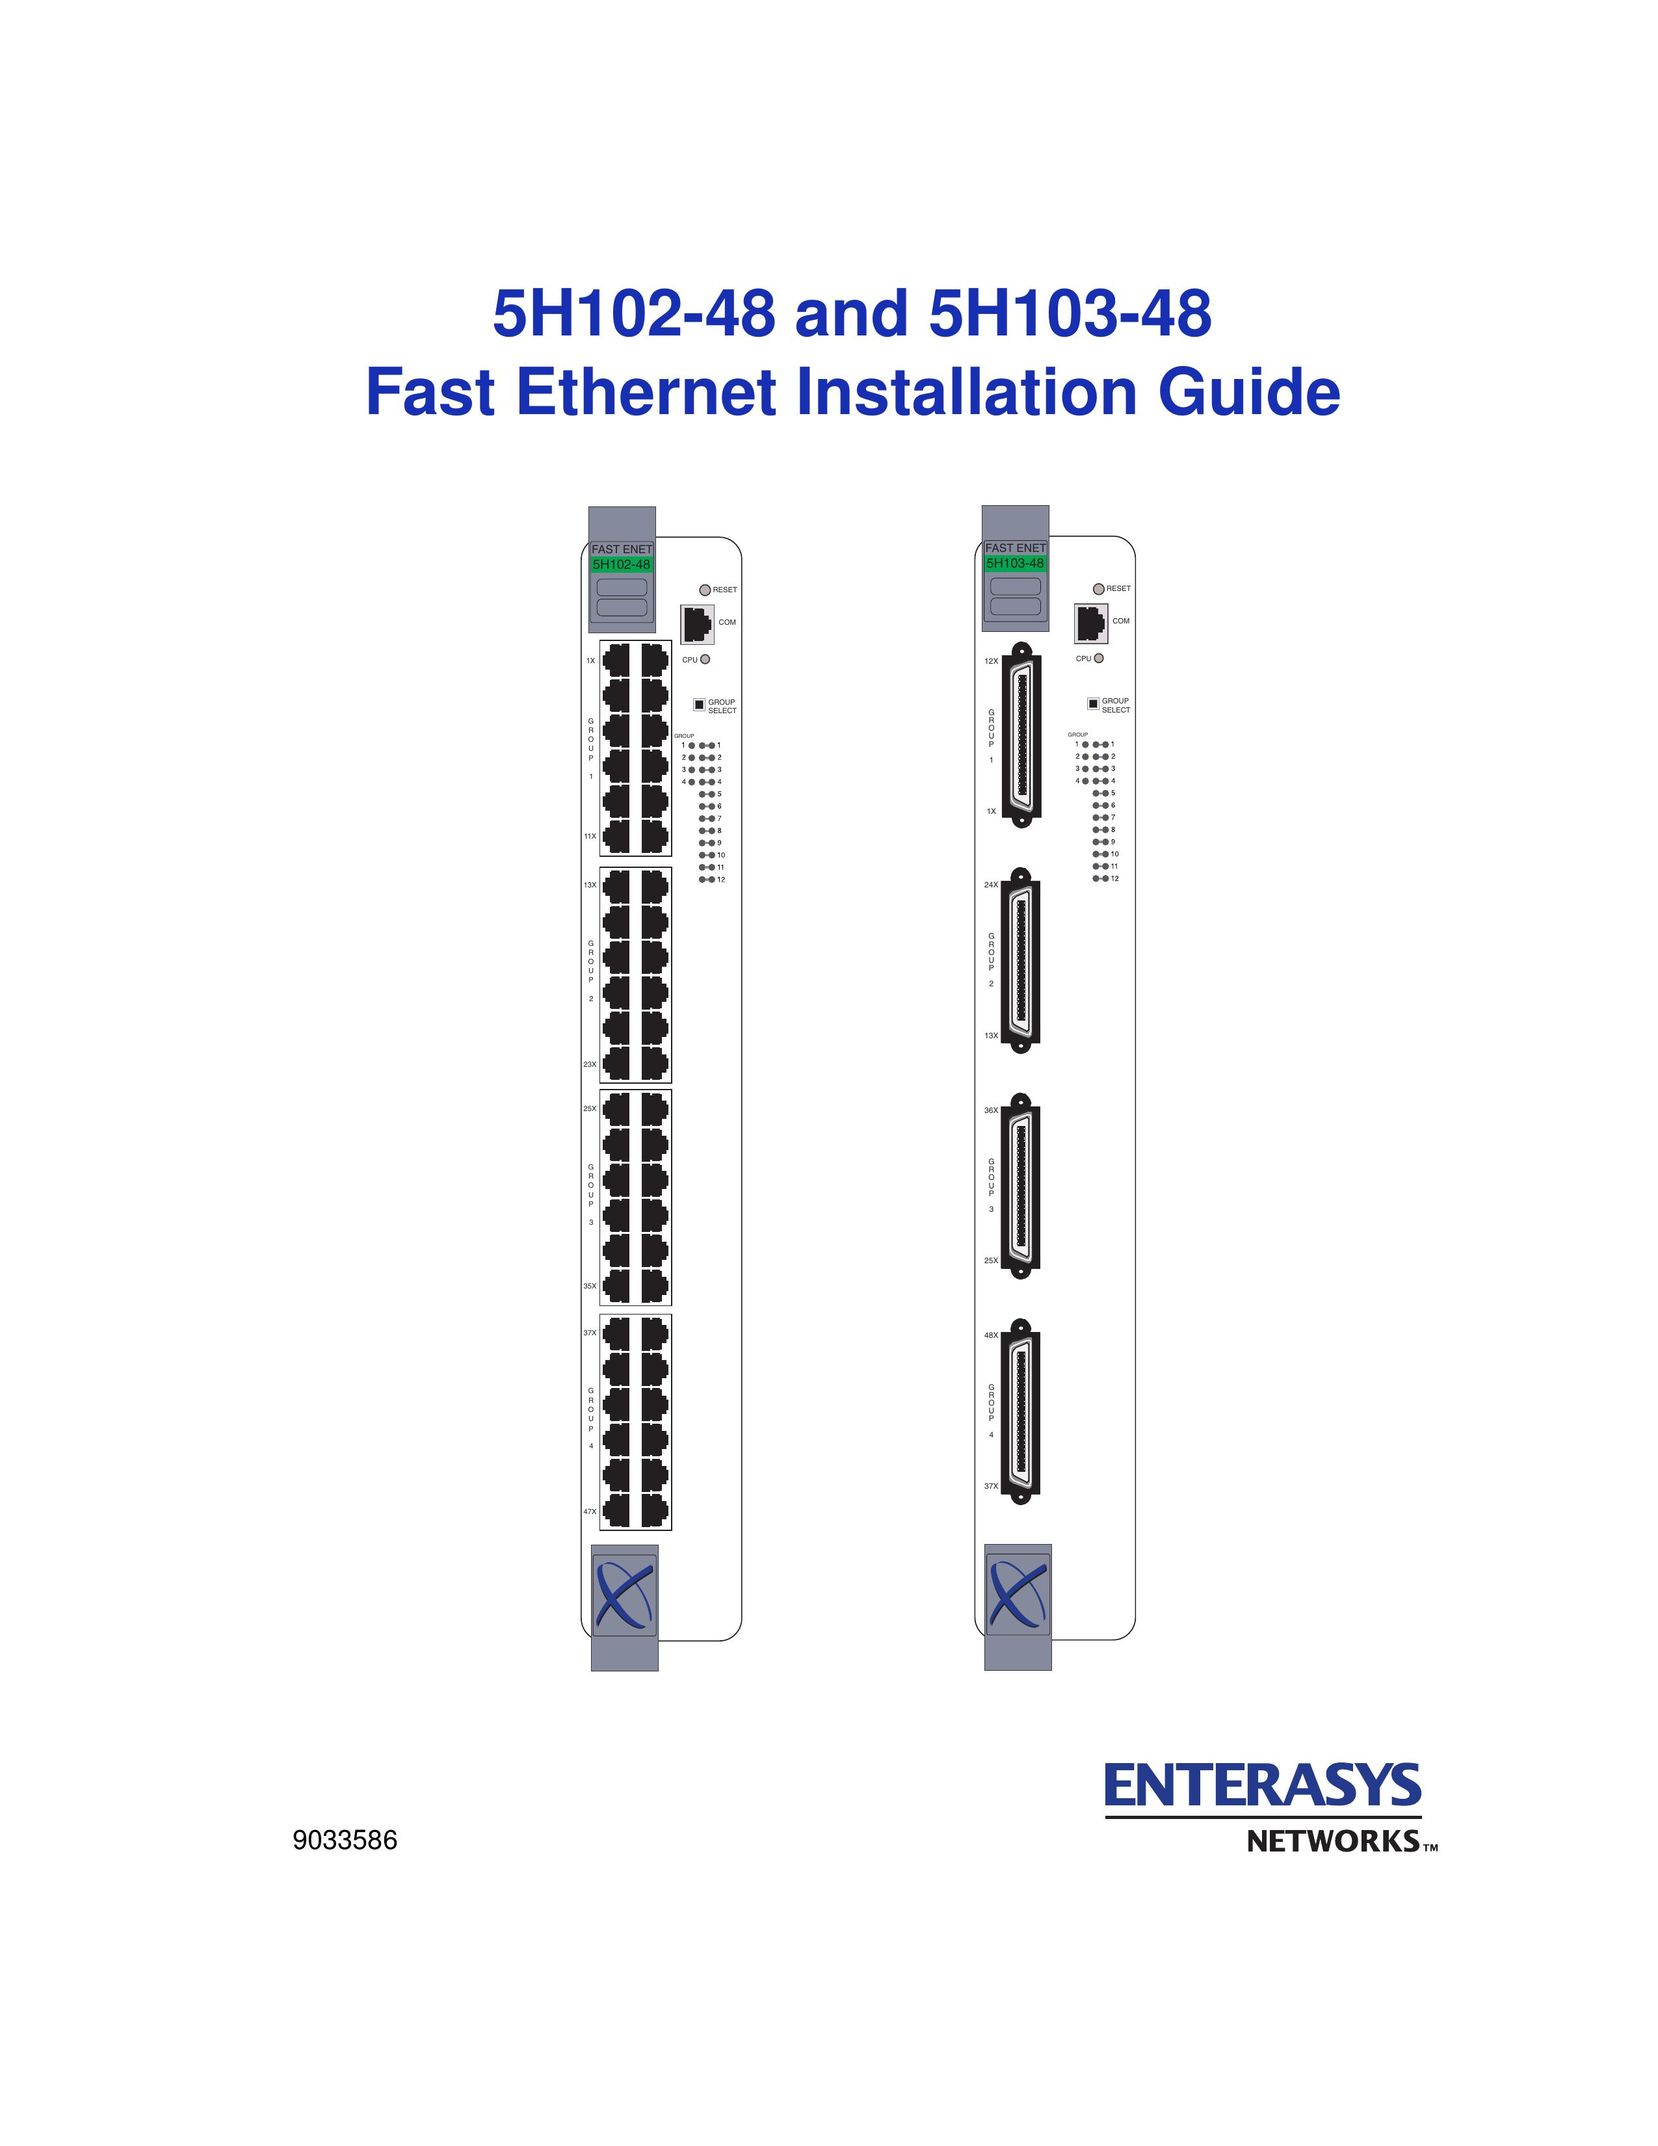 Enterasys Networks 5H102-48 Home Theater Screen User Manual